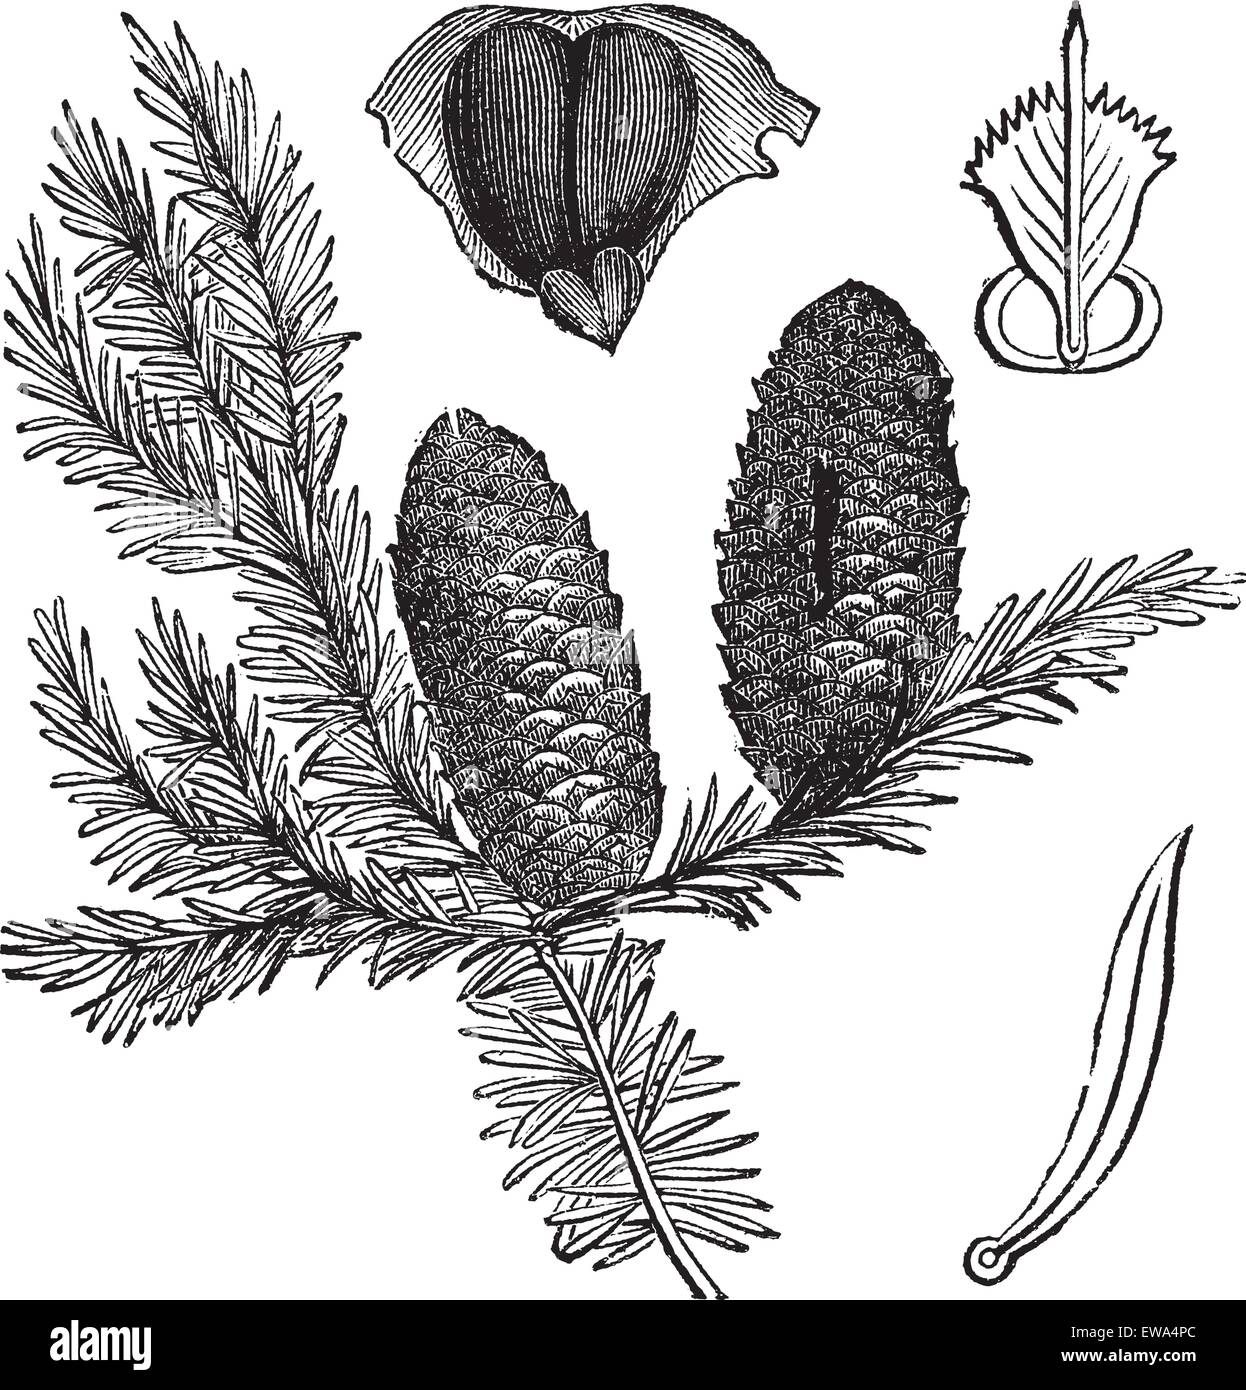 Balsam fir or Abies balsamea, vintage engraving. Old engraved illustration of Balsam fir isolated on a white background. Stock Vector